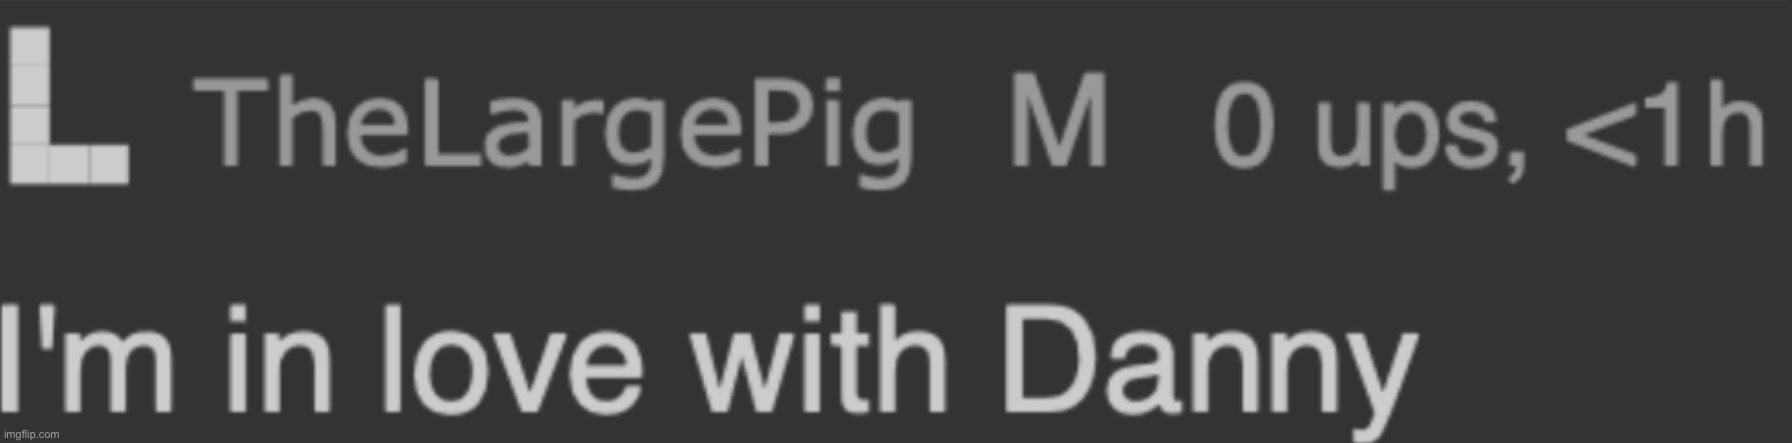 TheLargePig gay confirmed part 2 | image tagged in thelargepig gay confirmed part 2 | made w/ Imgflip meme maker